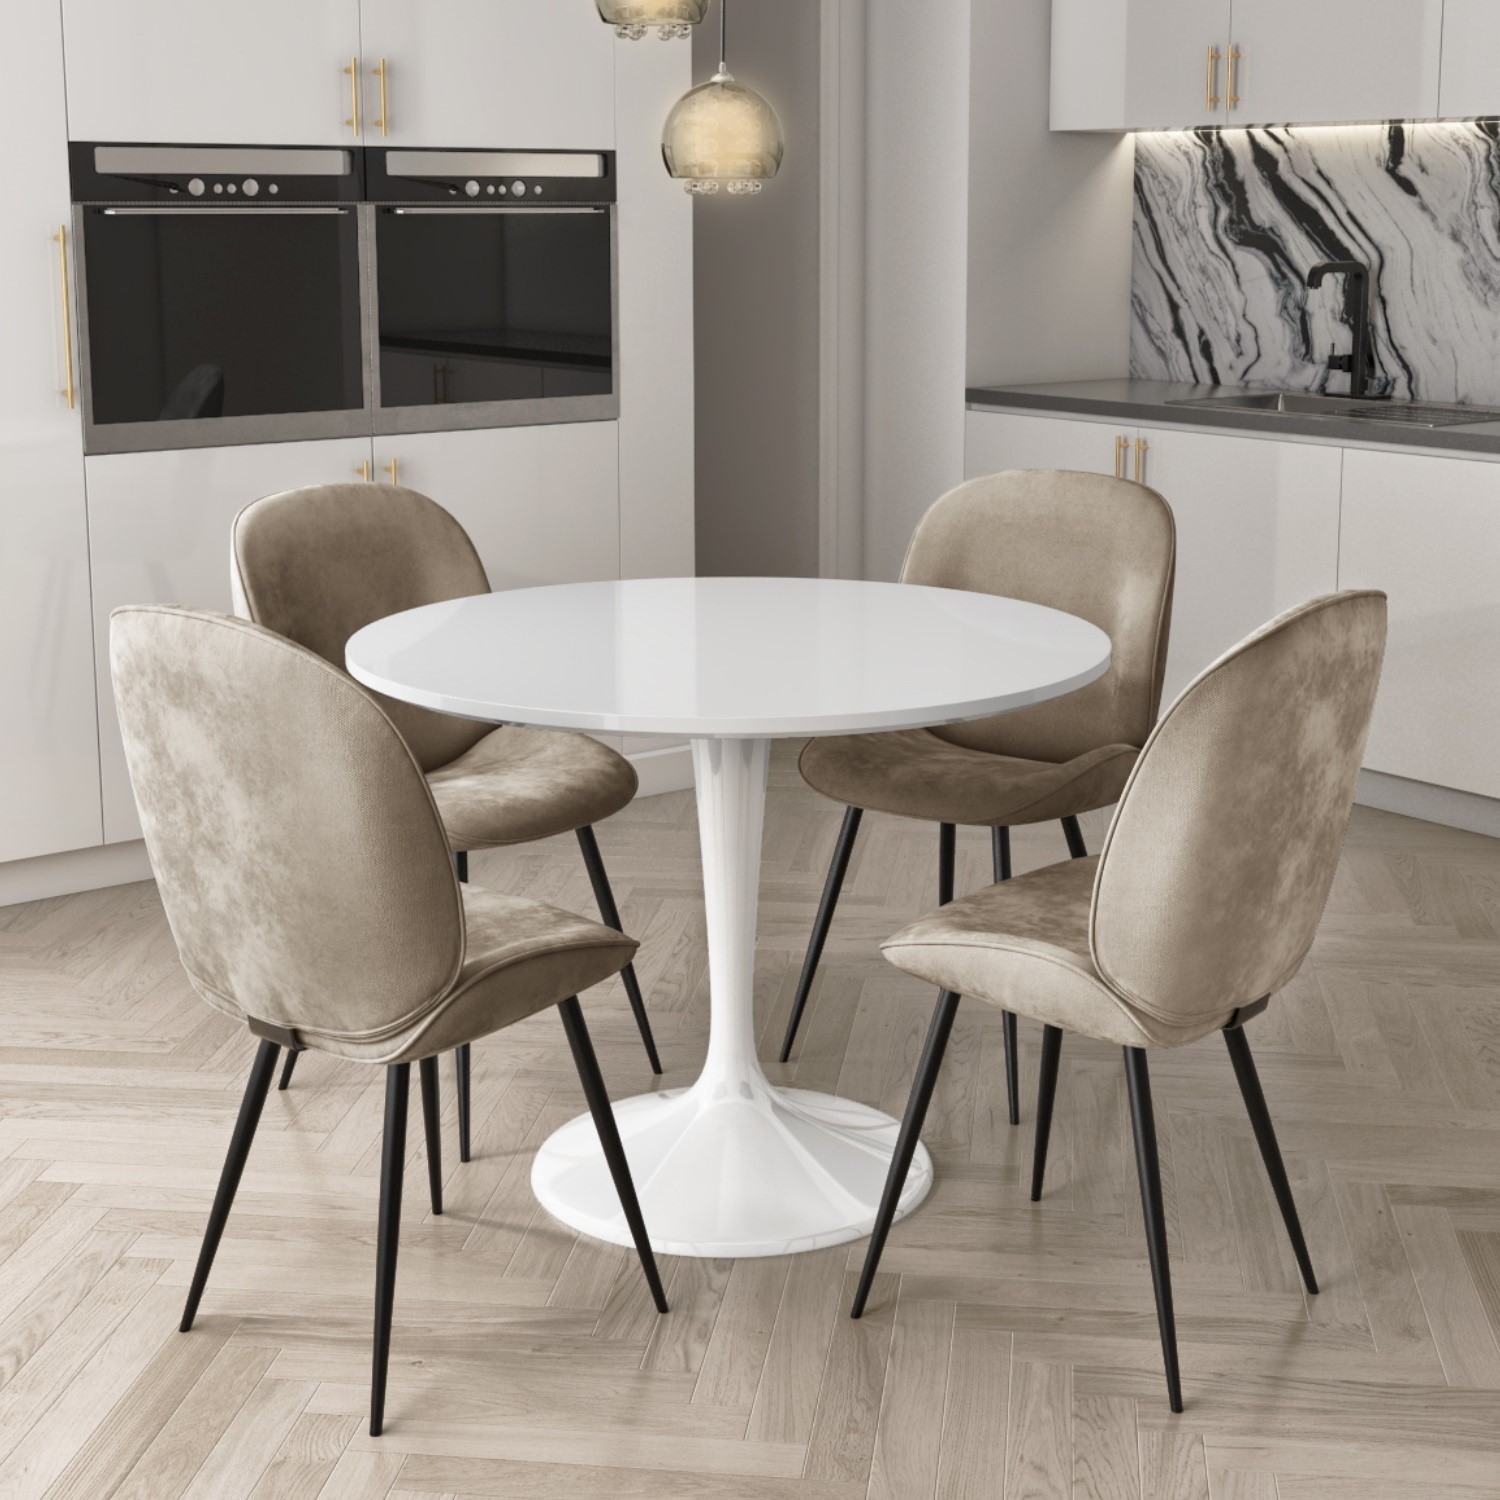 White Round High Gloss Dining Table, Round White High Gloss Dining Table And Chairs